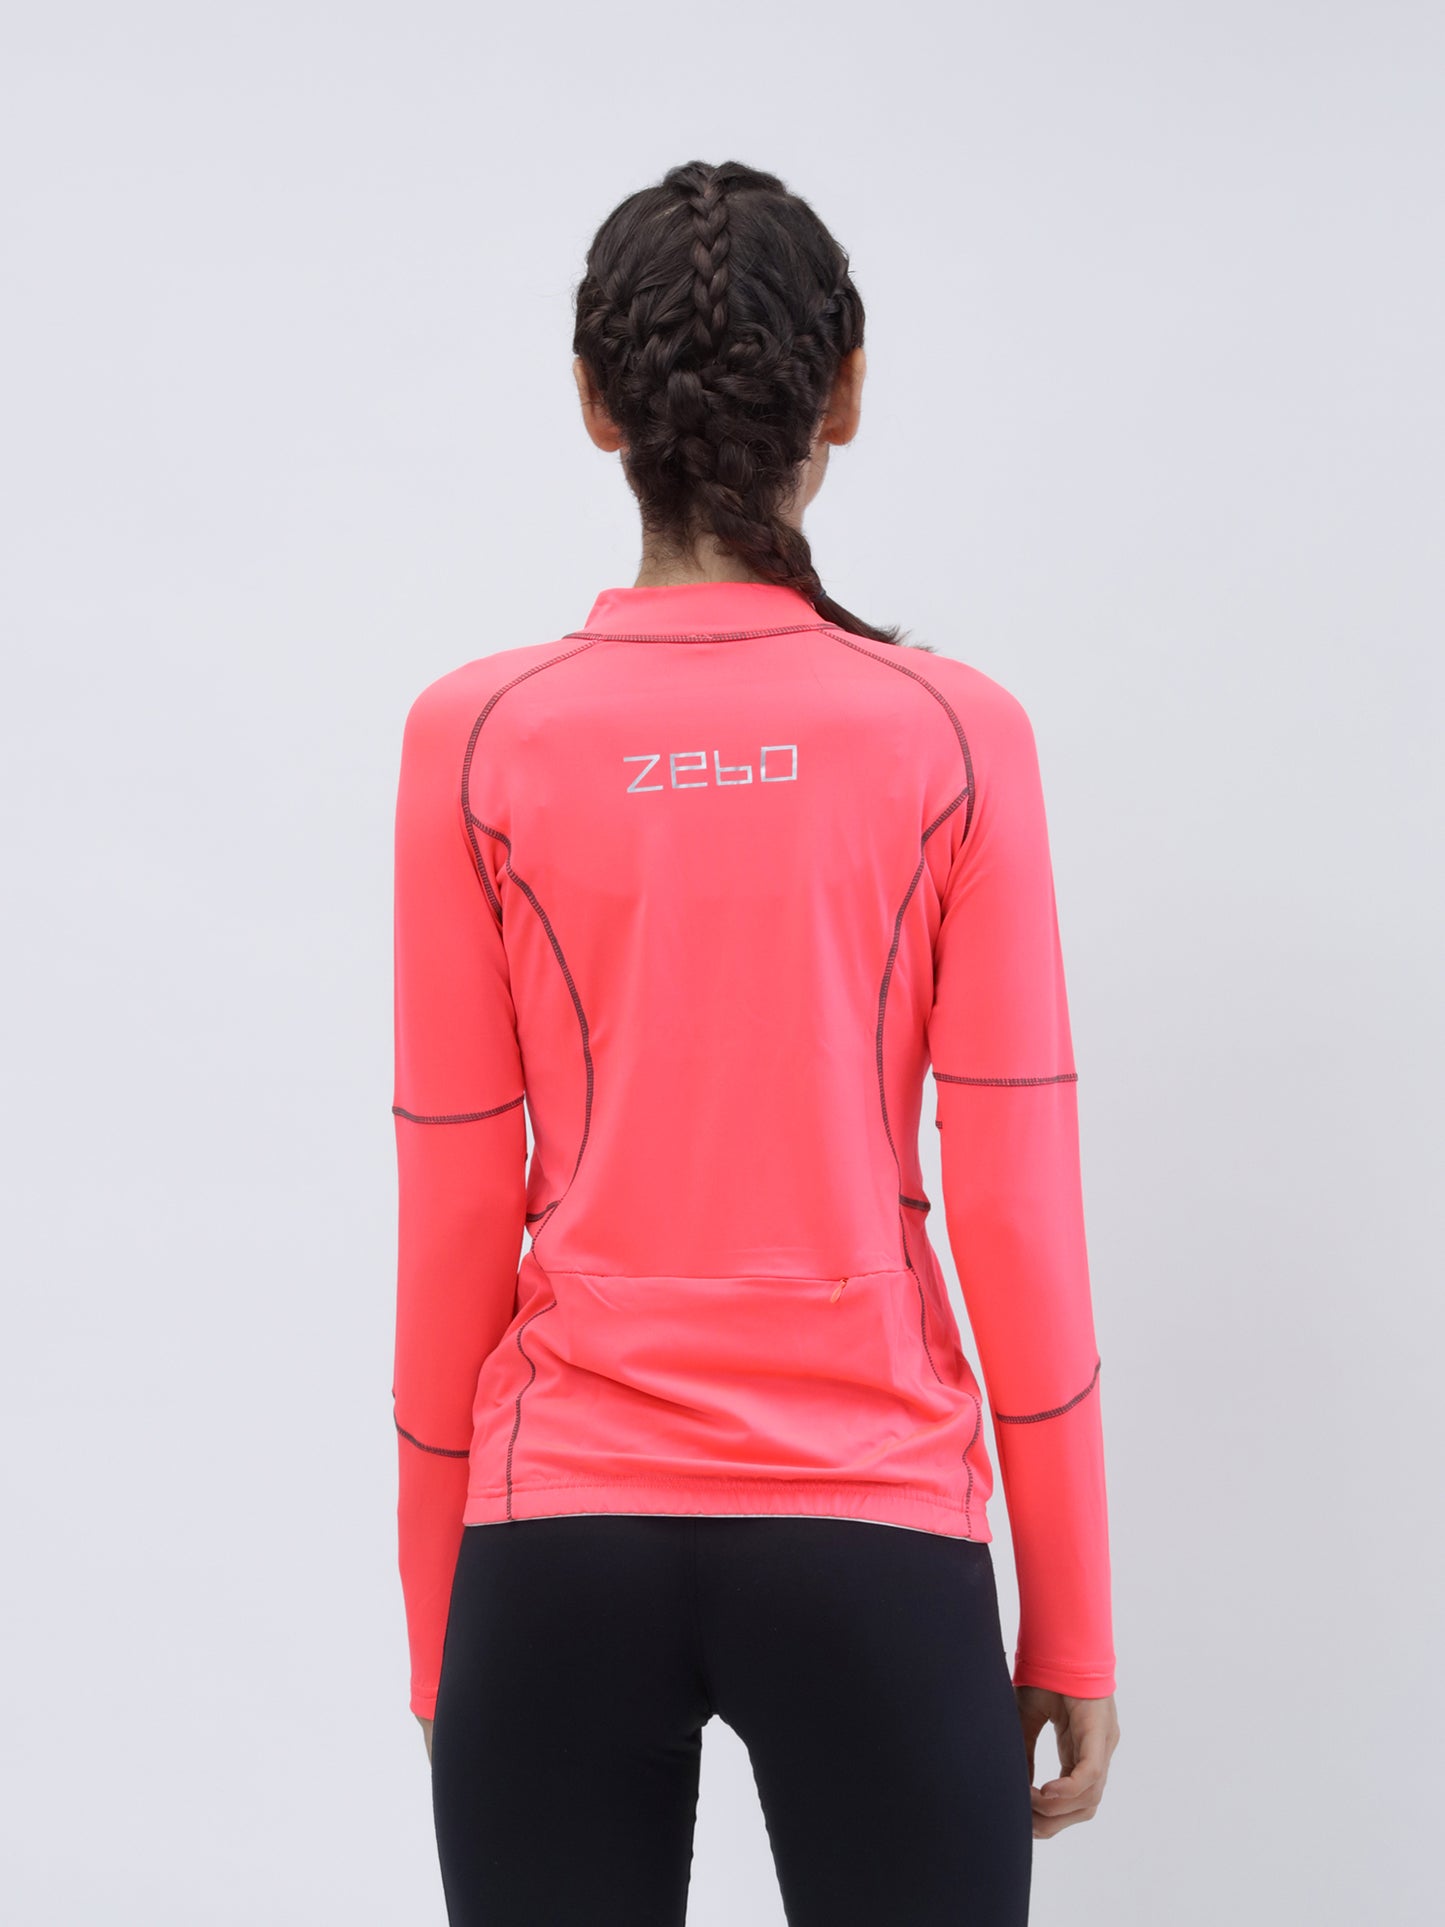 All weather anti bacterial flo pink jacket - Zebo Active Wear